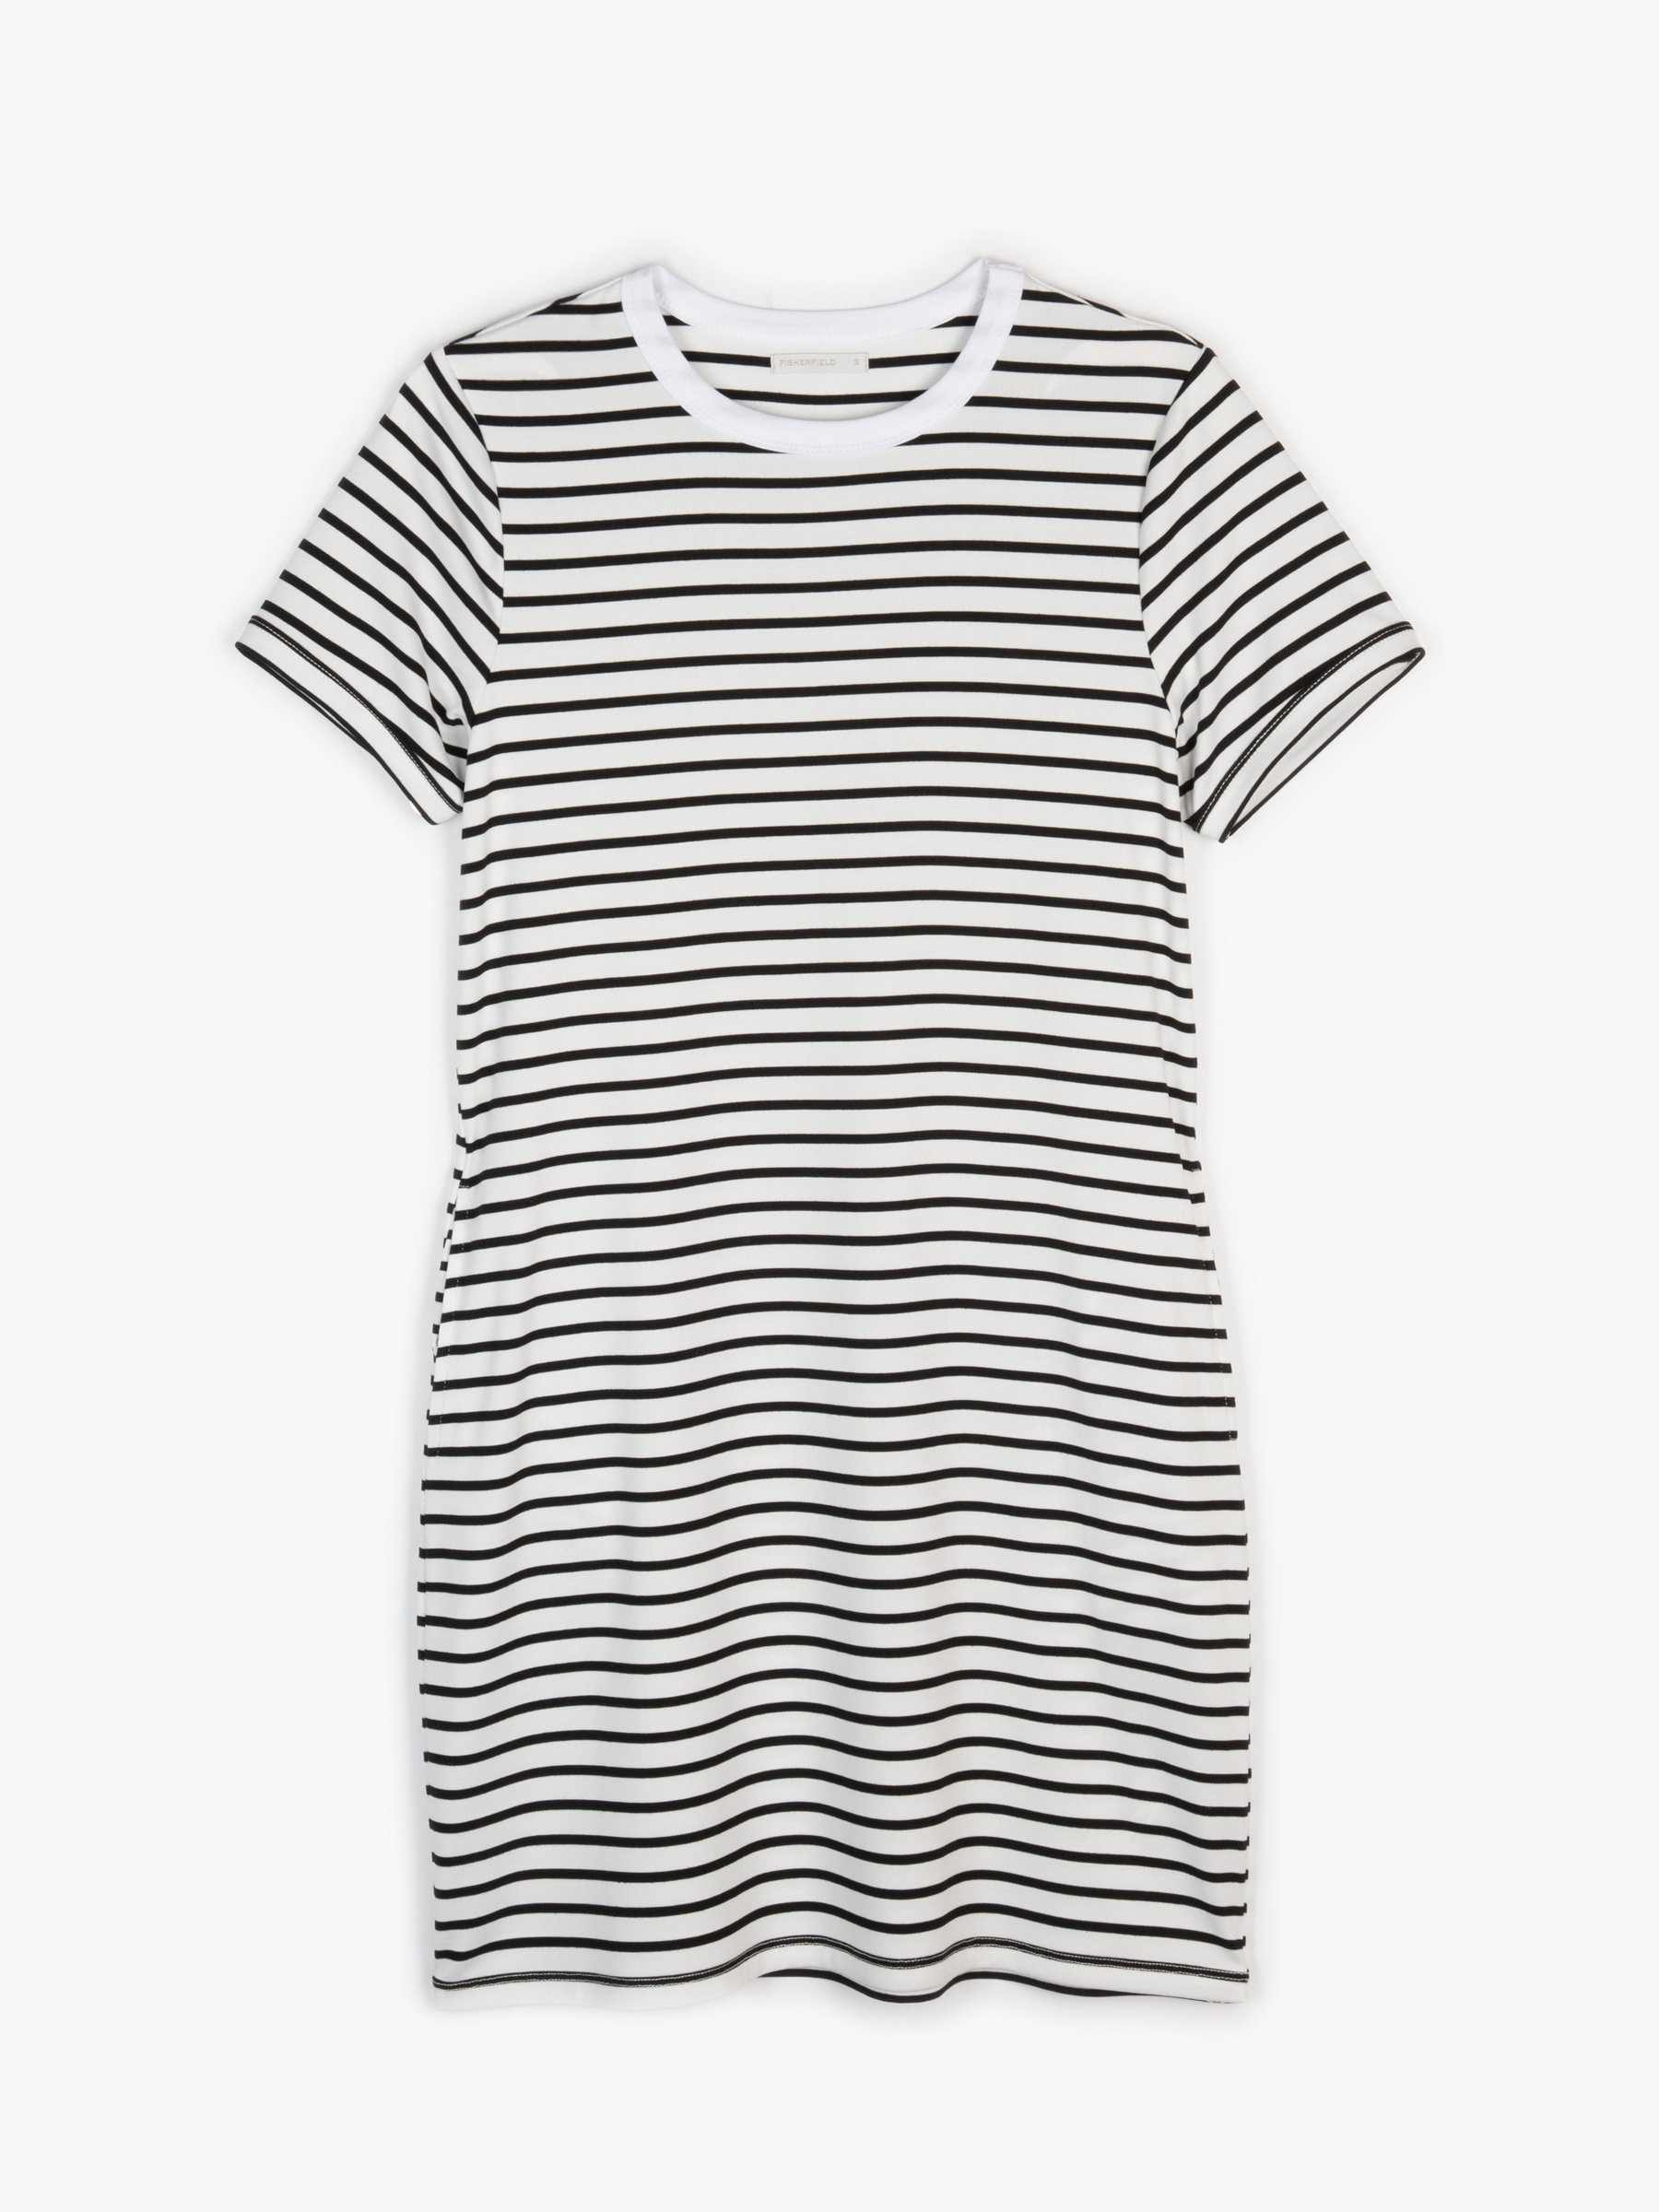 Striped t-shirt dress with pockets | GATE